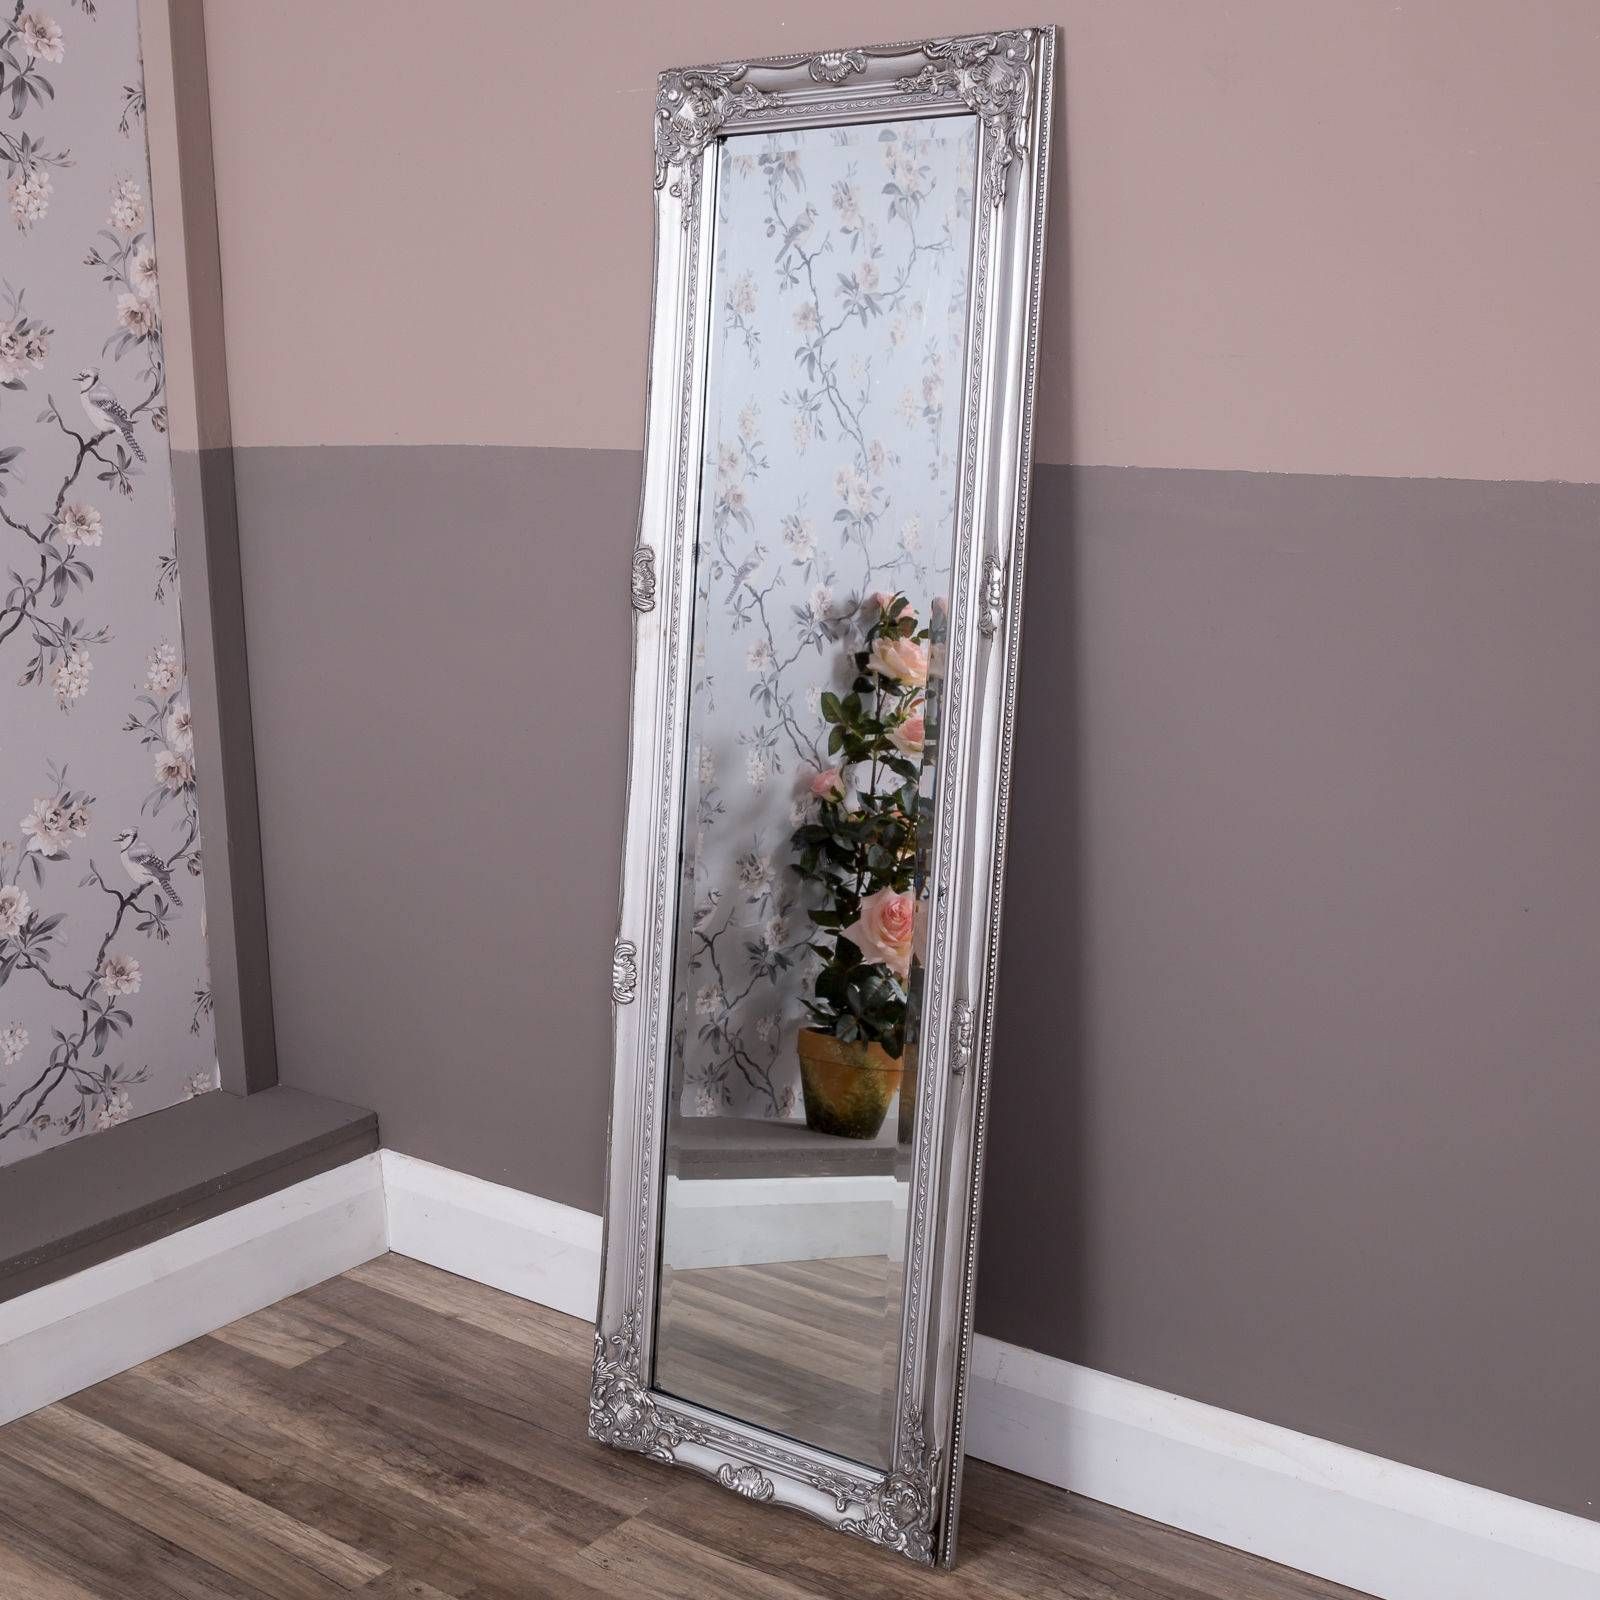 Decorative Mirrors | Ebay With Regard To Vintage Long Mirrors (View 10 of 15)